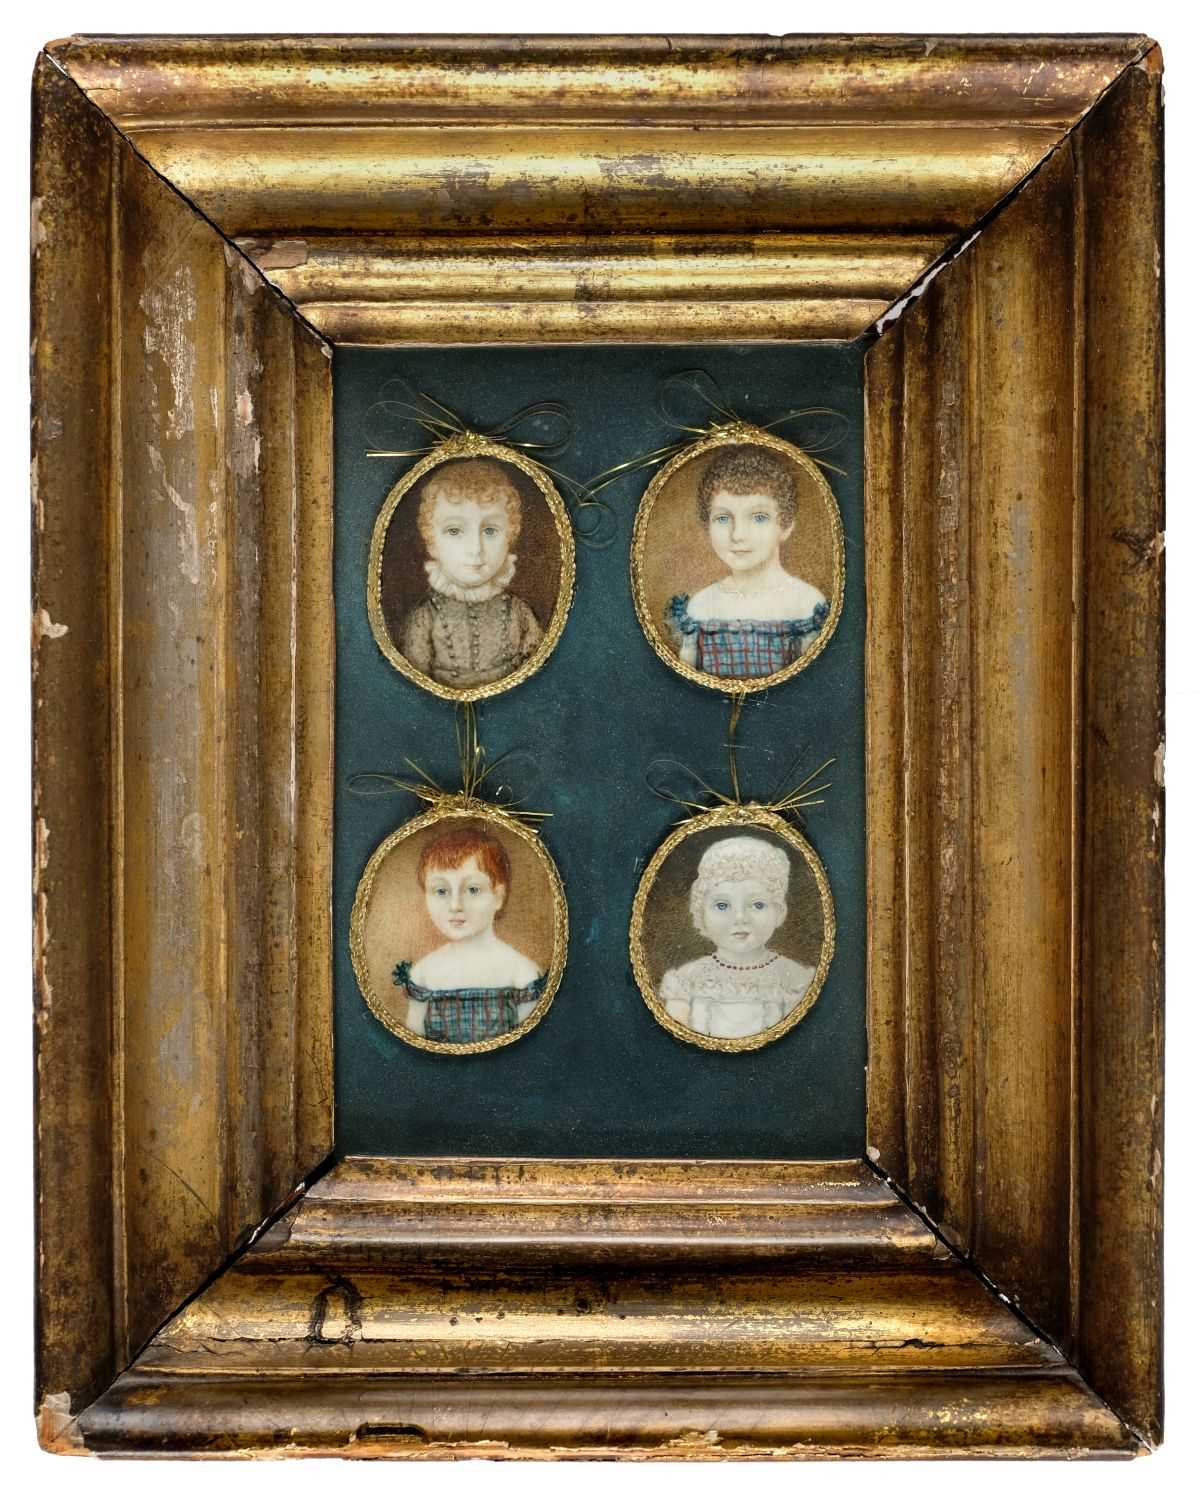 Lot 424 - Portrait Miniatures. A framed set of four oval miniature paintings of children, 1821